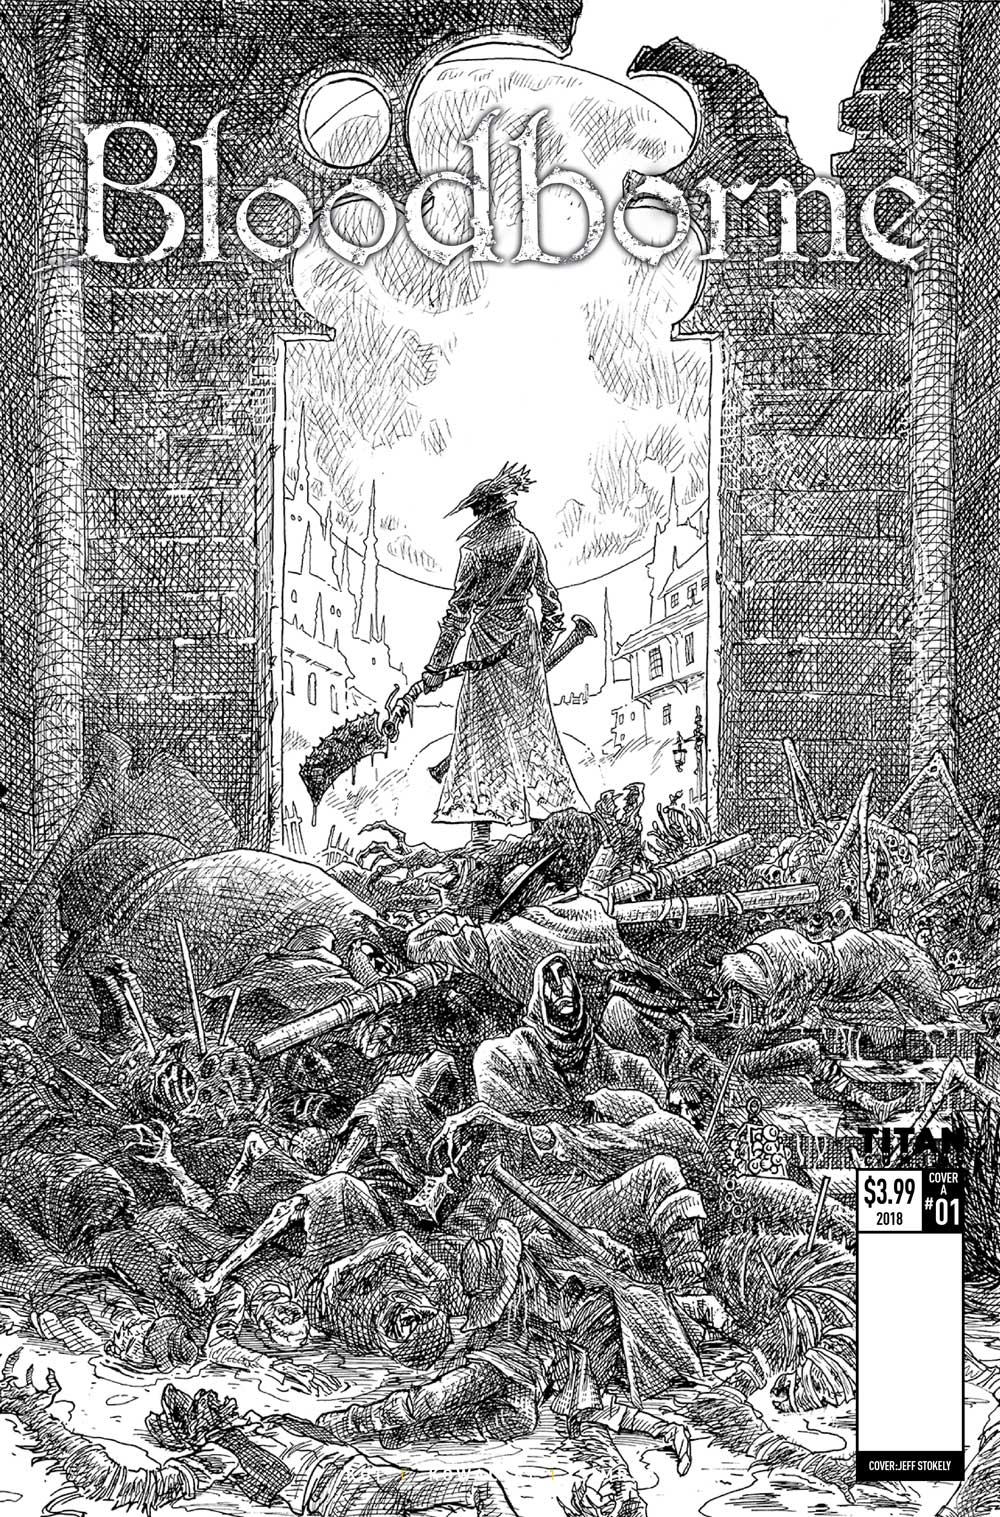 Image for First Bloodborne comic to be reissued and released alongside Bloodborne #2